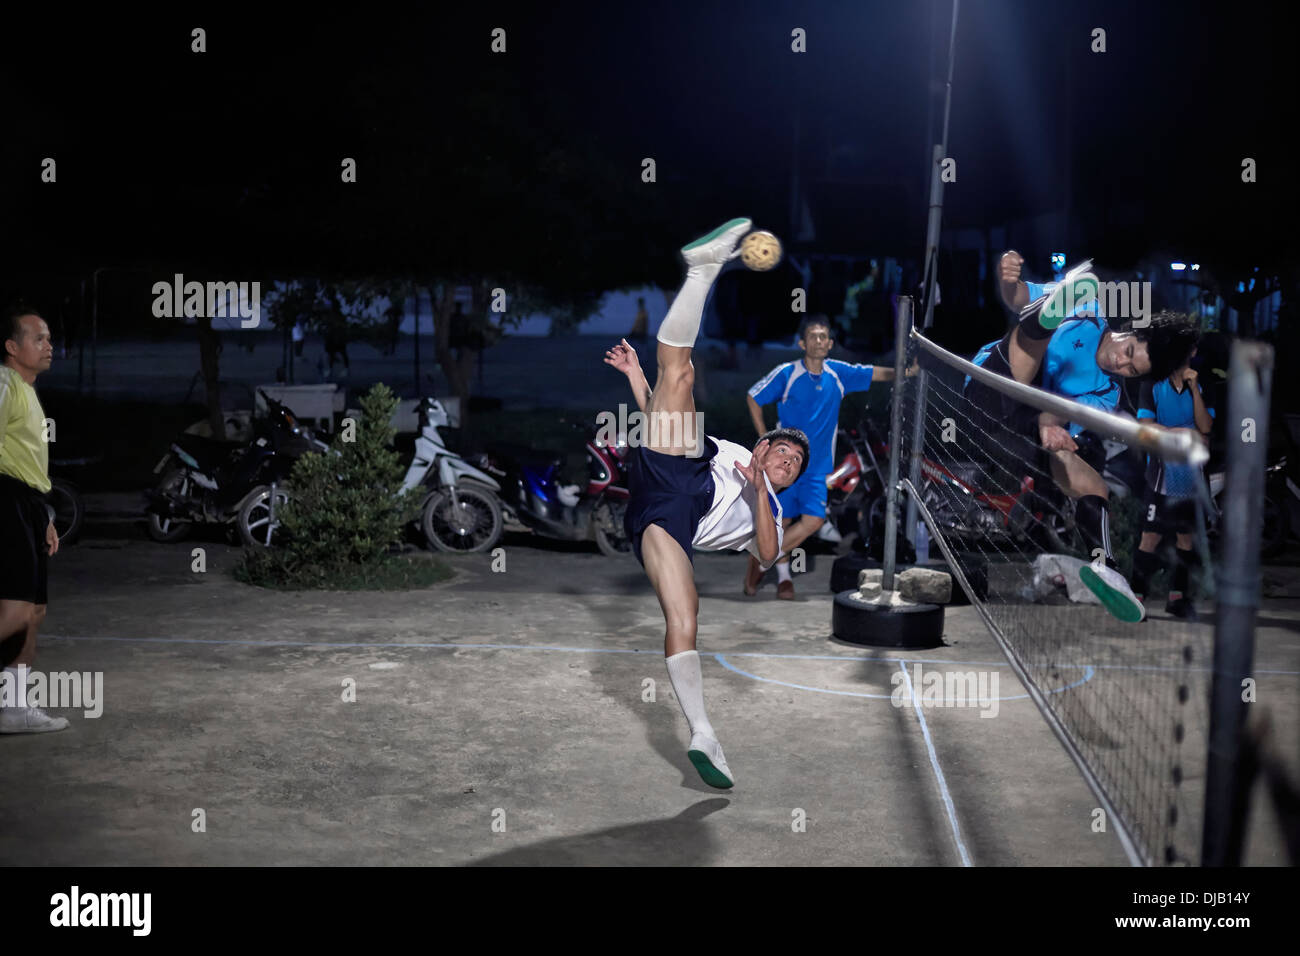 Extreme athleticism during a nighttime game of Sepak Takraw. Traditional and popular Thai football game. Thailand S. E. Asia Stock Photo